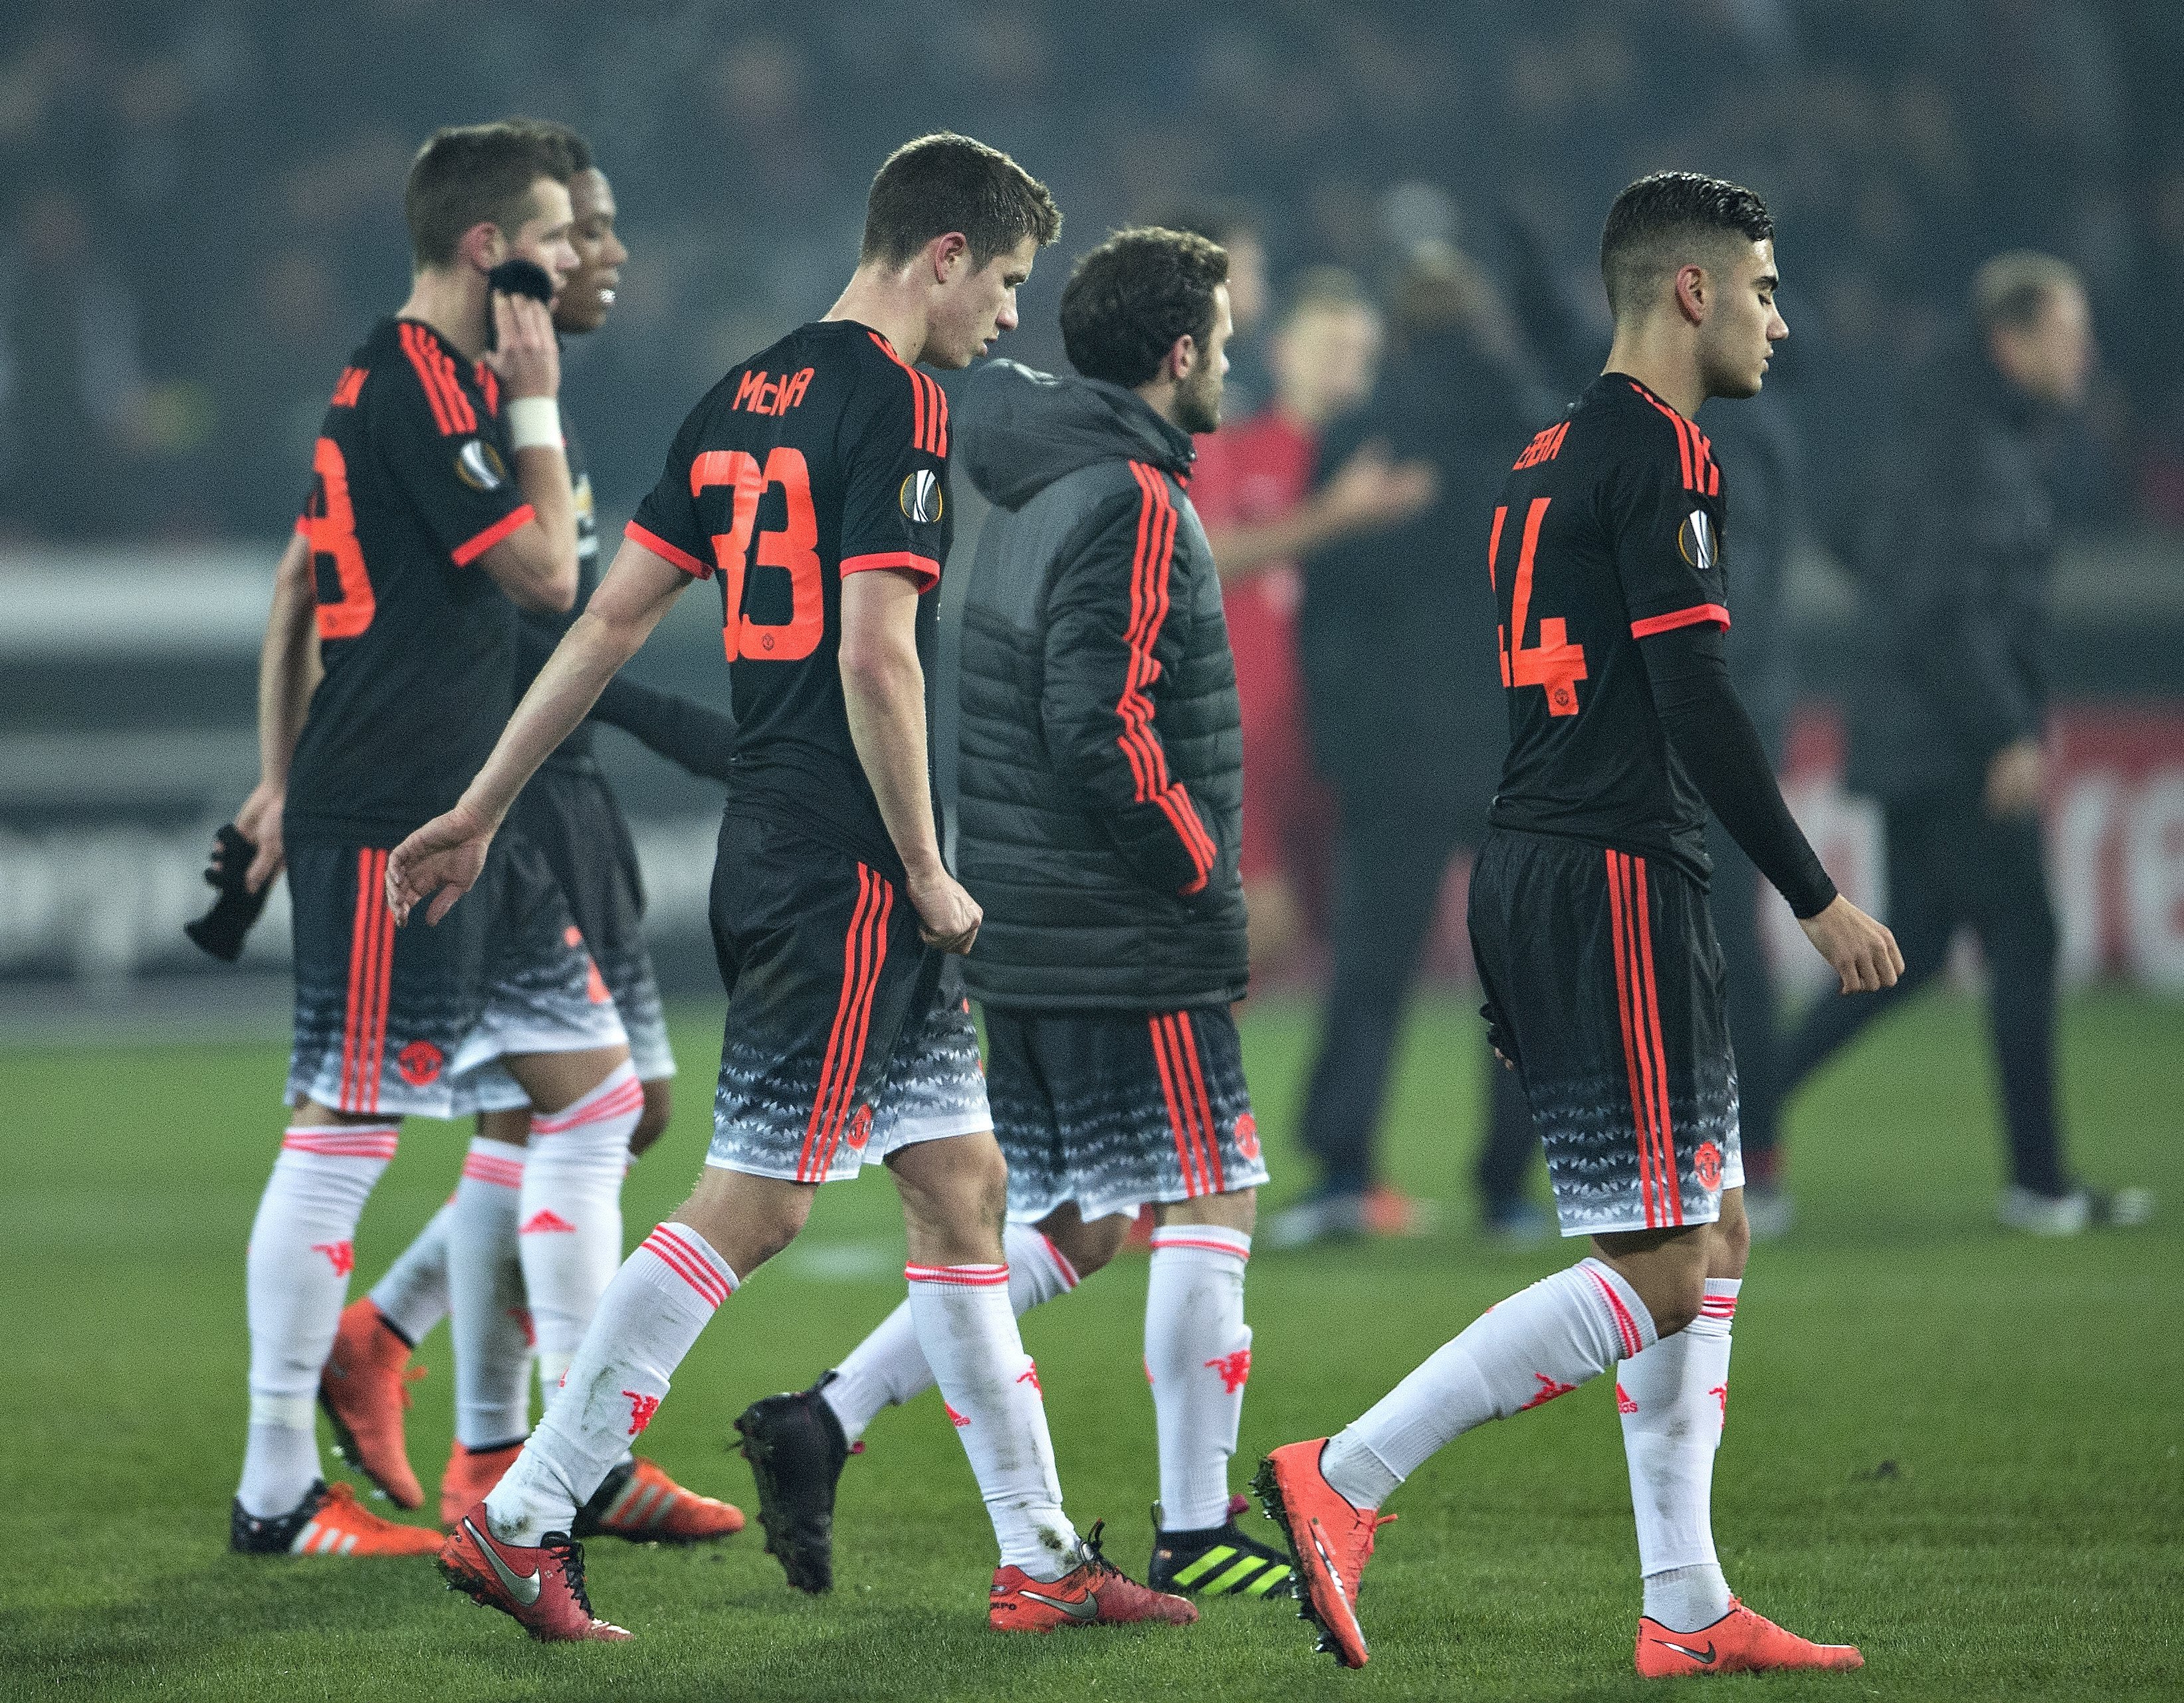 Manchester United players were dejected after another poor result. This time going down to Danish outfit Midtjylland. Photo: Reuters